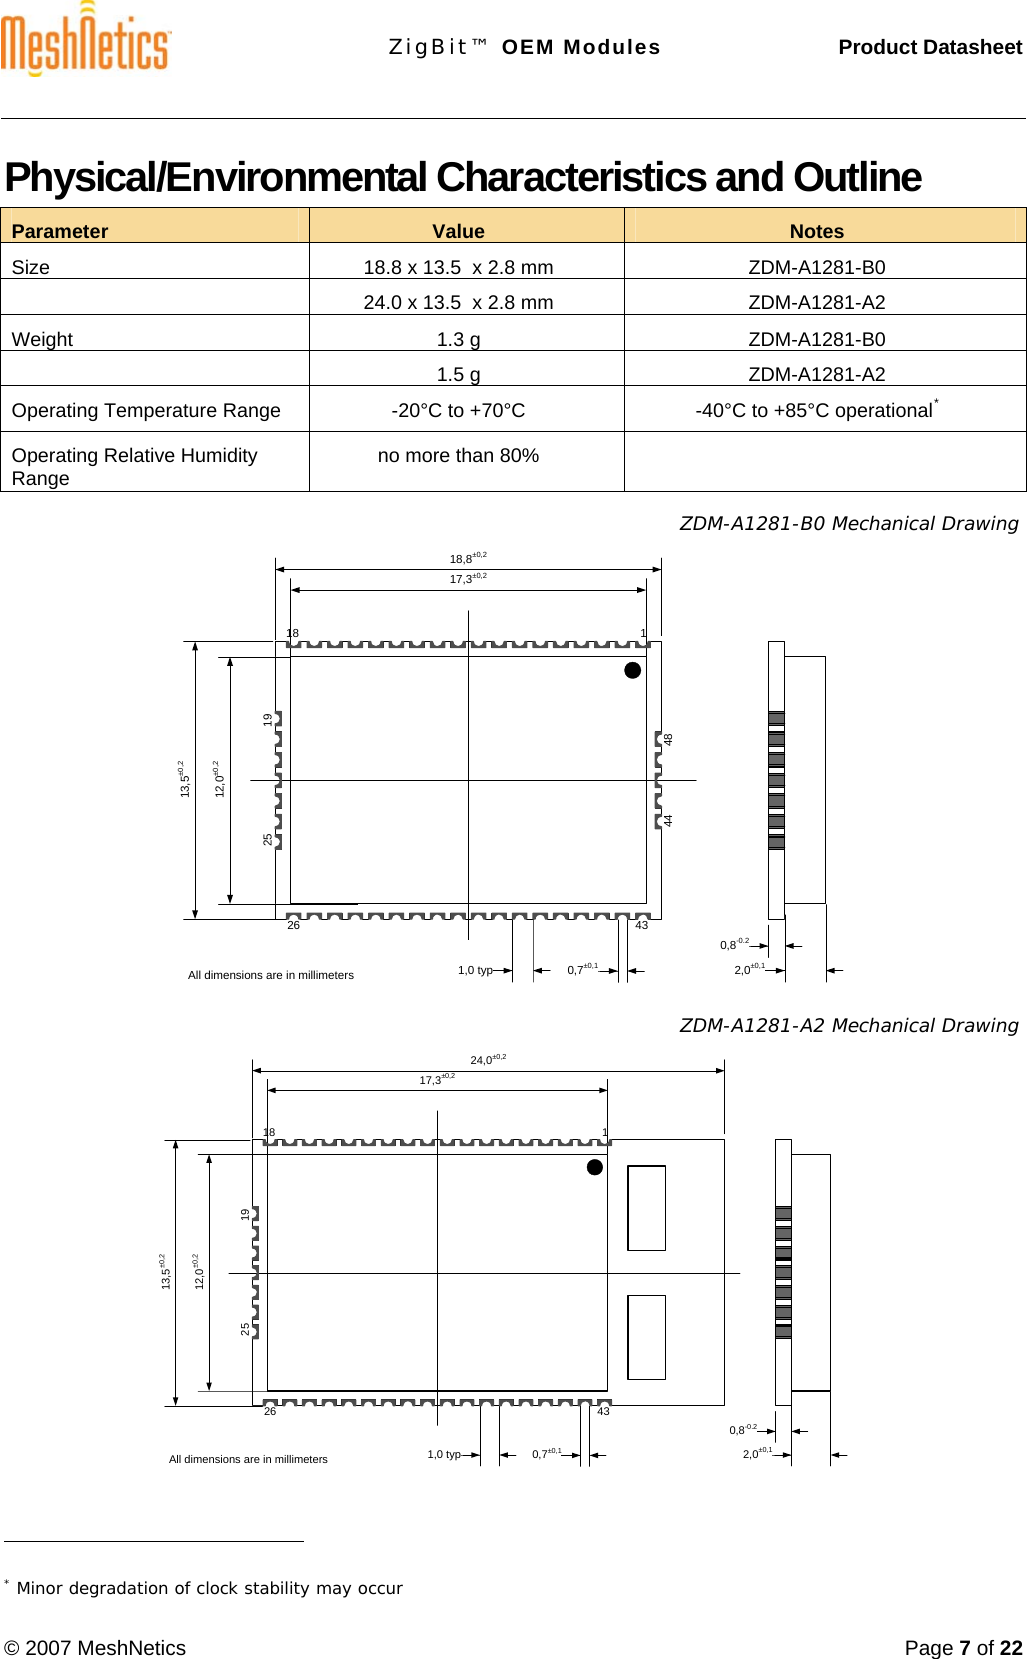 ZigBit™ OEM Modules     Product Datasheet  © 2007 MeshNetics  Page 7 of 22  Physical/Environmental Characteristics and Outline  Parameter Value Notes Size  18.8 x 13.5  x 2.8 mm ZDM-A1281-B0   24.0 x 13.5  x 2.8 mm  ZDM-A1281-A2 Weight 1.3 gZDM-A1281-B0  1.5gZDM-A1281-A2 Operating Temperature Range  -20°C to +70°C  -40°C to +85°C operational* Operating Relative Humidity Range  no more than 80%    ZDM-A1281-B0 Mechanical Drawing 17,3±0,212,0±0,213,5±0,218,8±0,20,8-0.22,0±0,11,0 typ 0,7±0,1118192526 4344 48All dimensions are in millimeters   ZDM-A1281-A2 Mechanical Drawing 17,3±0,212,0±0,213,5±0,224,0±0,20,8-0.22,0±0,11,0 typ 0,7±0,1118192526 43All dimensions are in millimeters                                                    * Minor degradation of clock stability may occur 